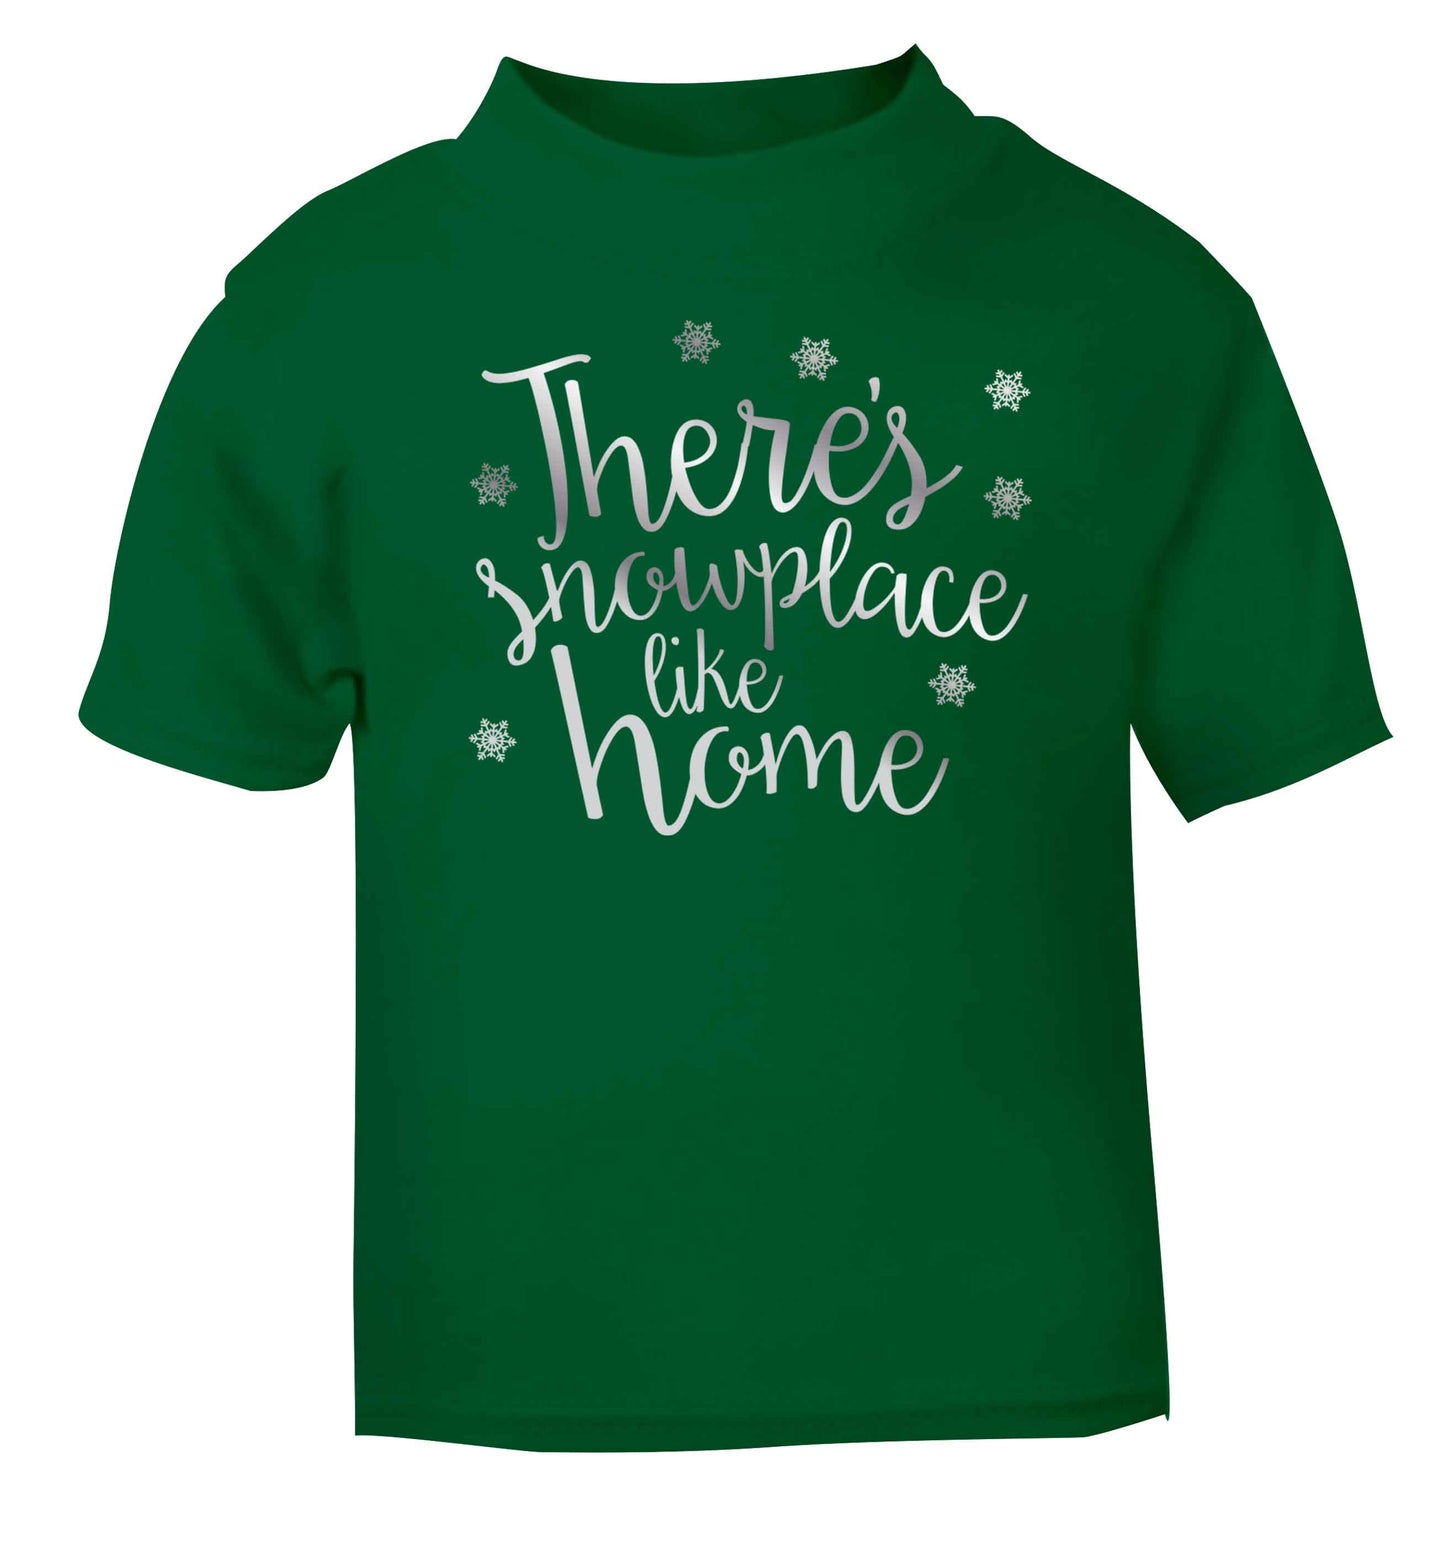 There's snowplace like home - metallic silver green baby toddler Tshirt 2 Years